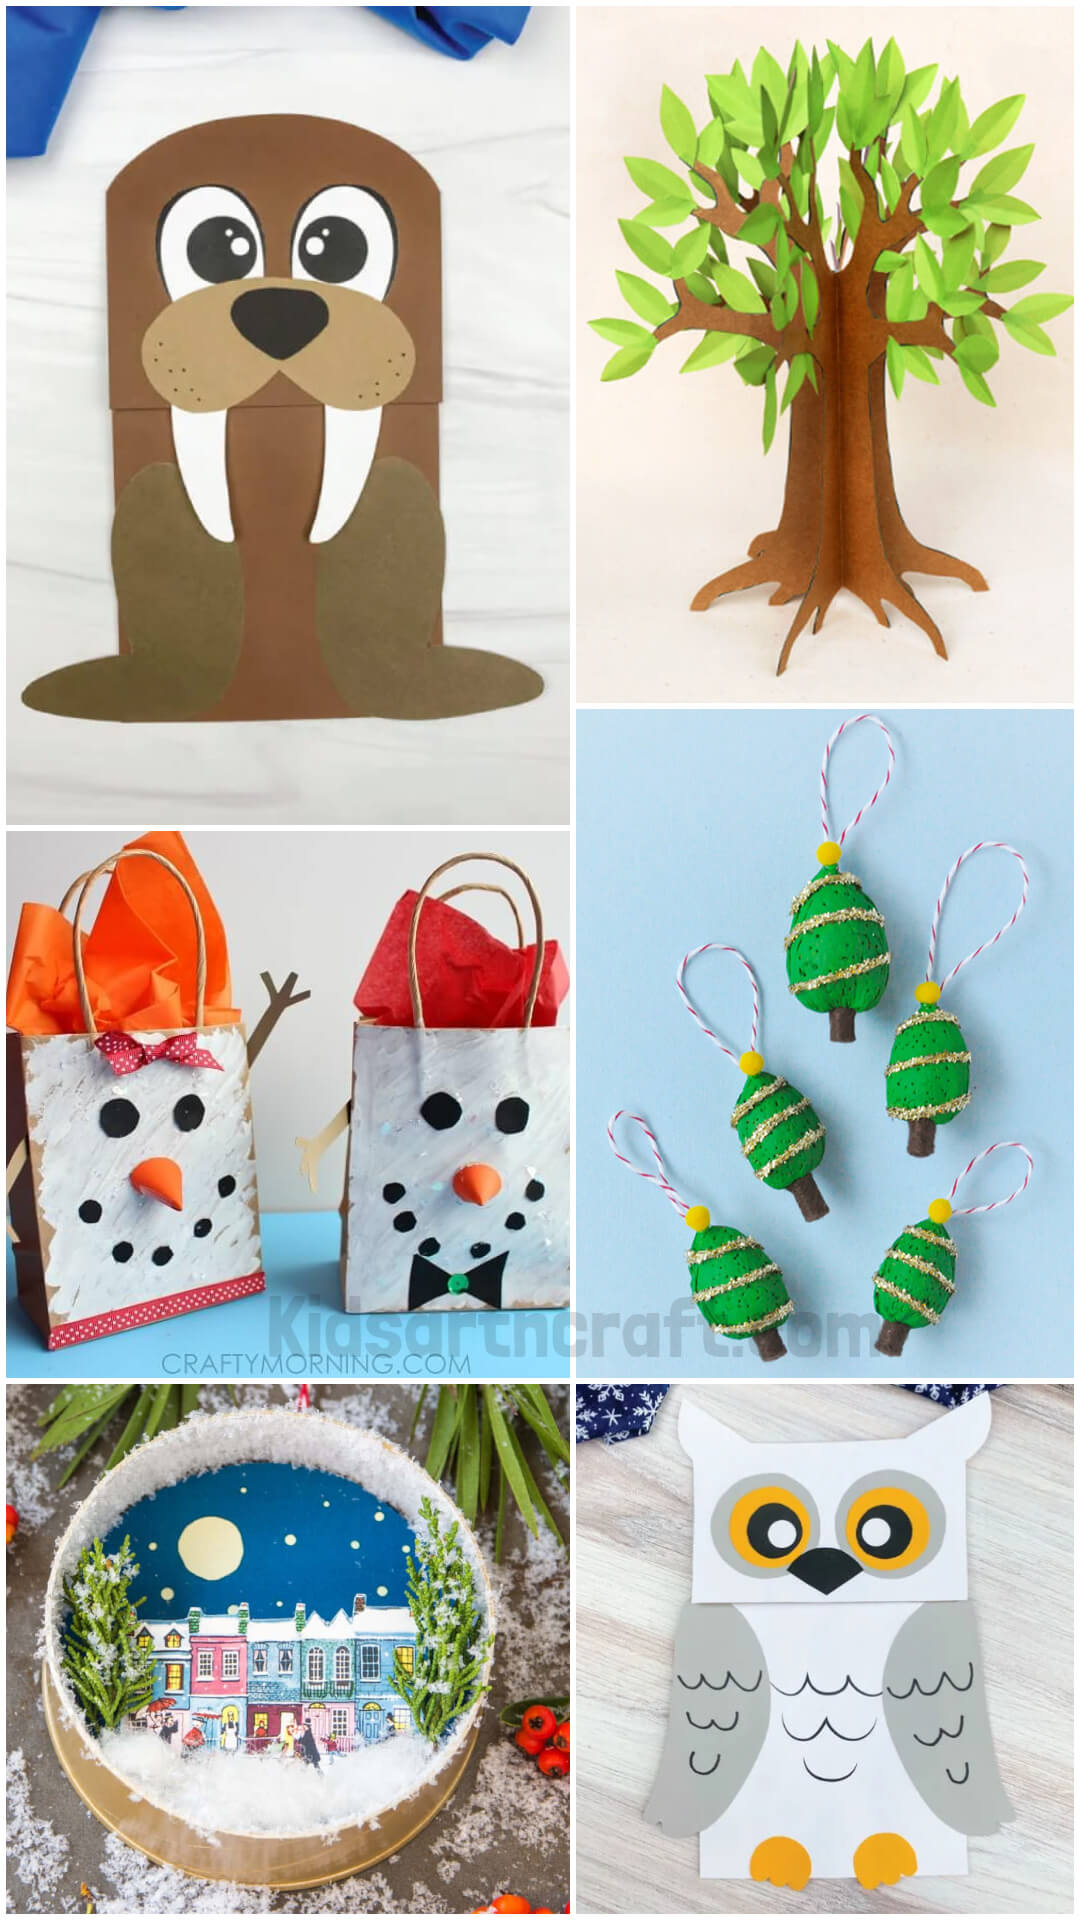 Recycled Winter Crafts For Kids